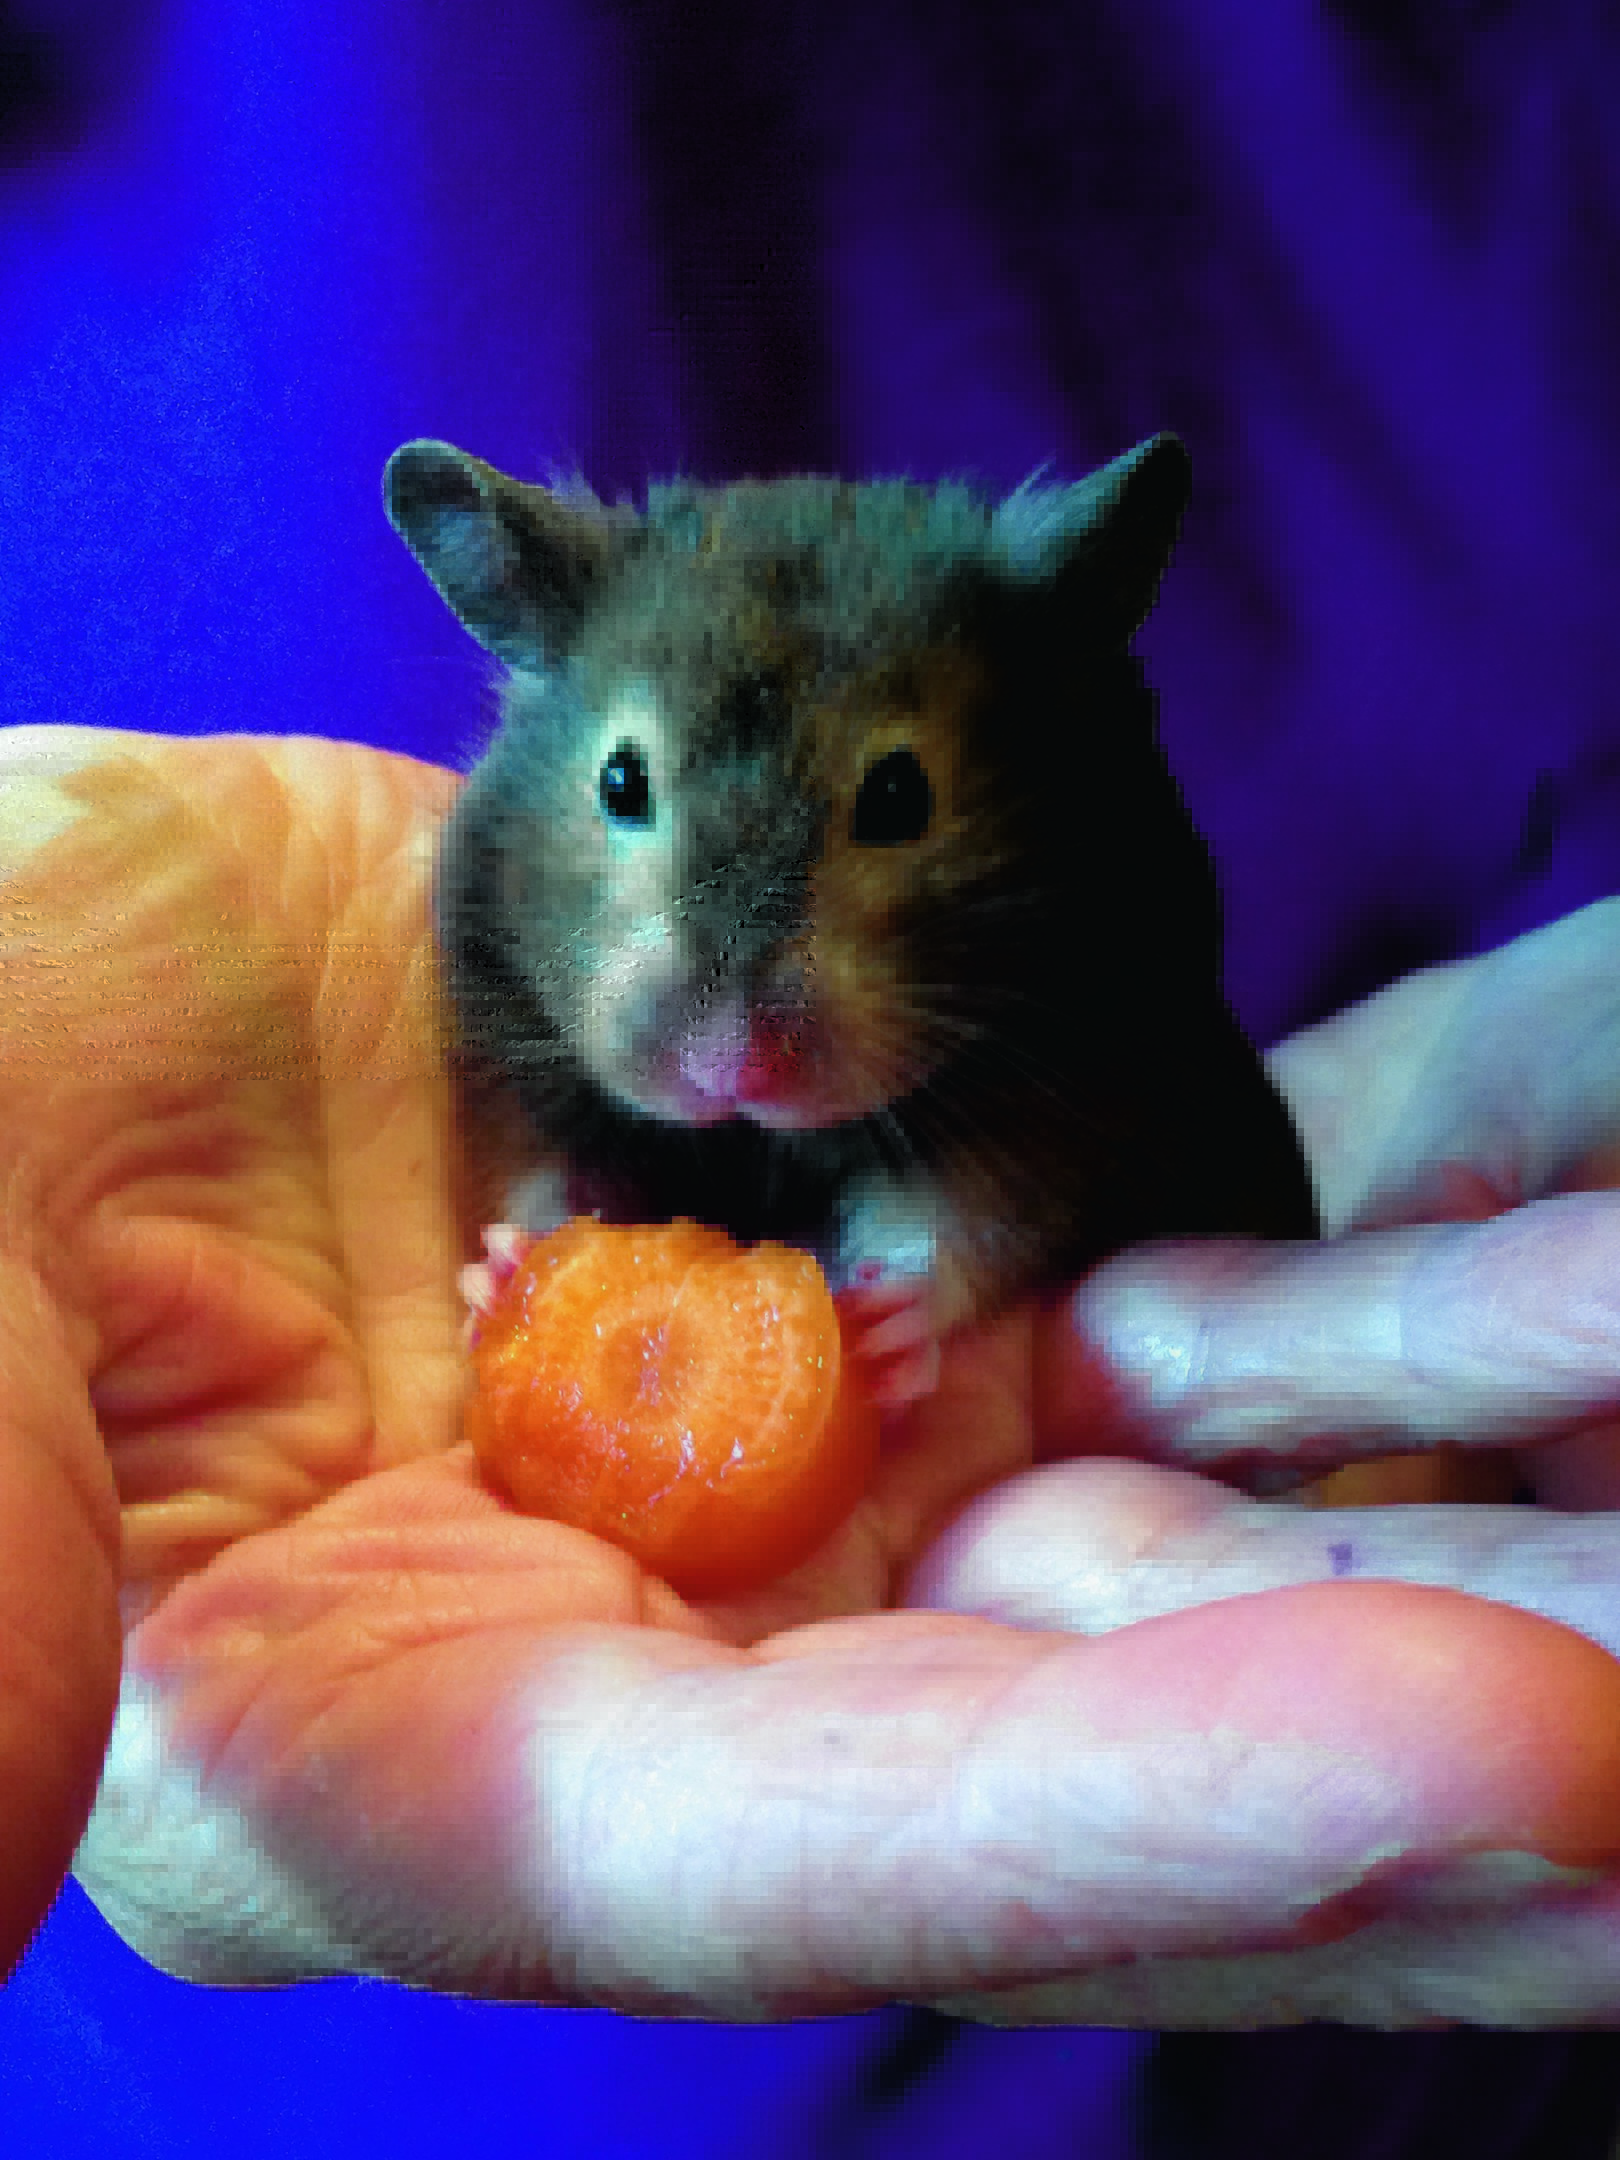 This is Minnie the hamster from Edinburgh, on holiday in Aberdeen visiting Helen Morgan. She is our winner this week.